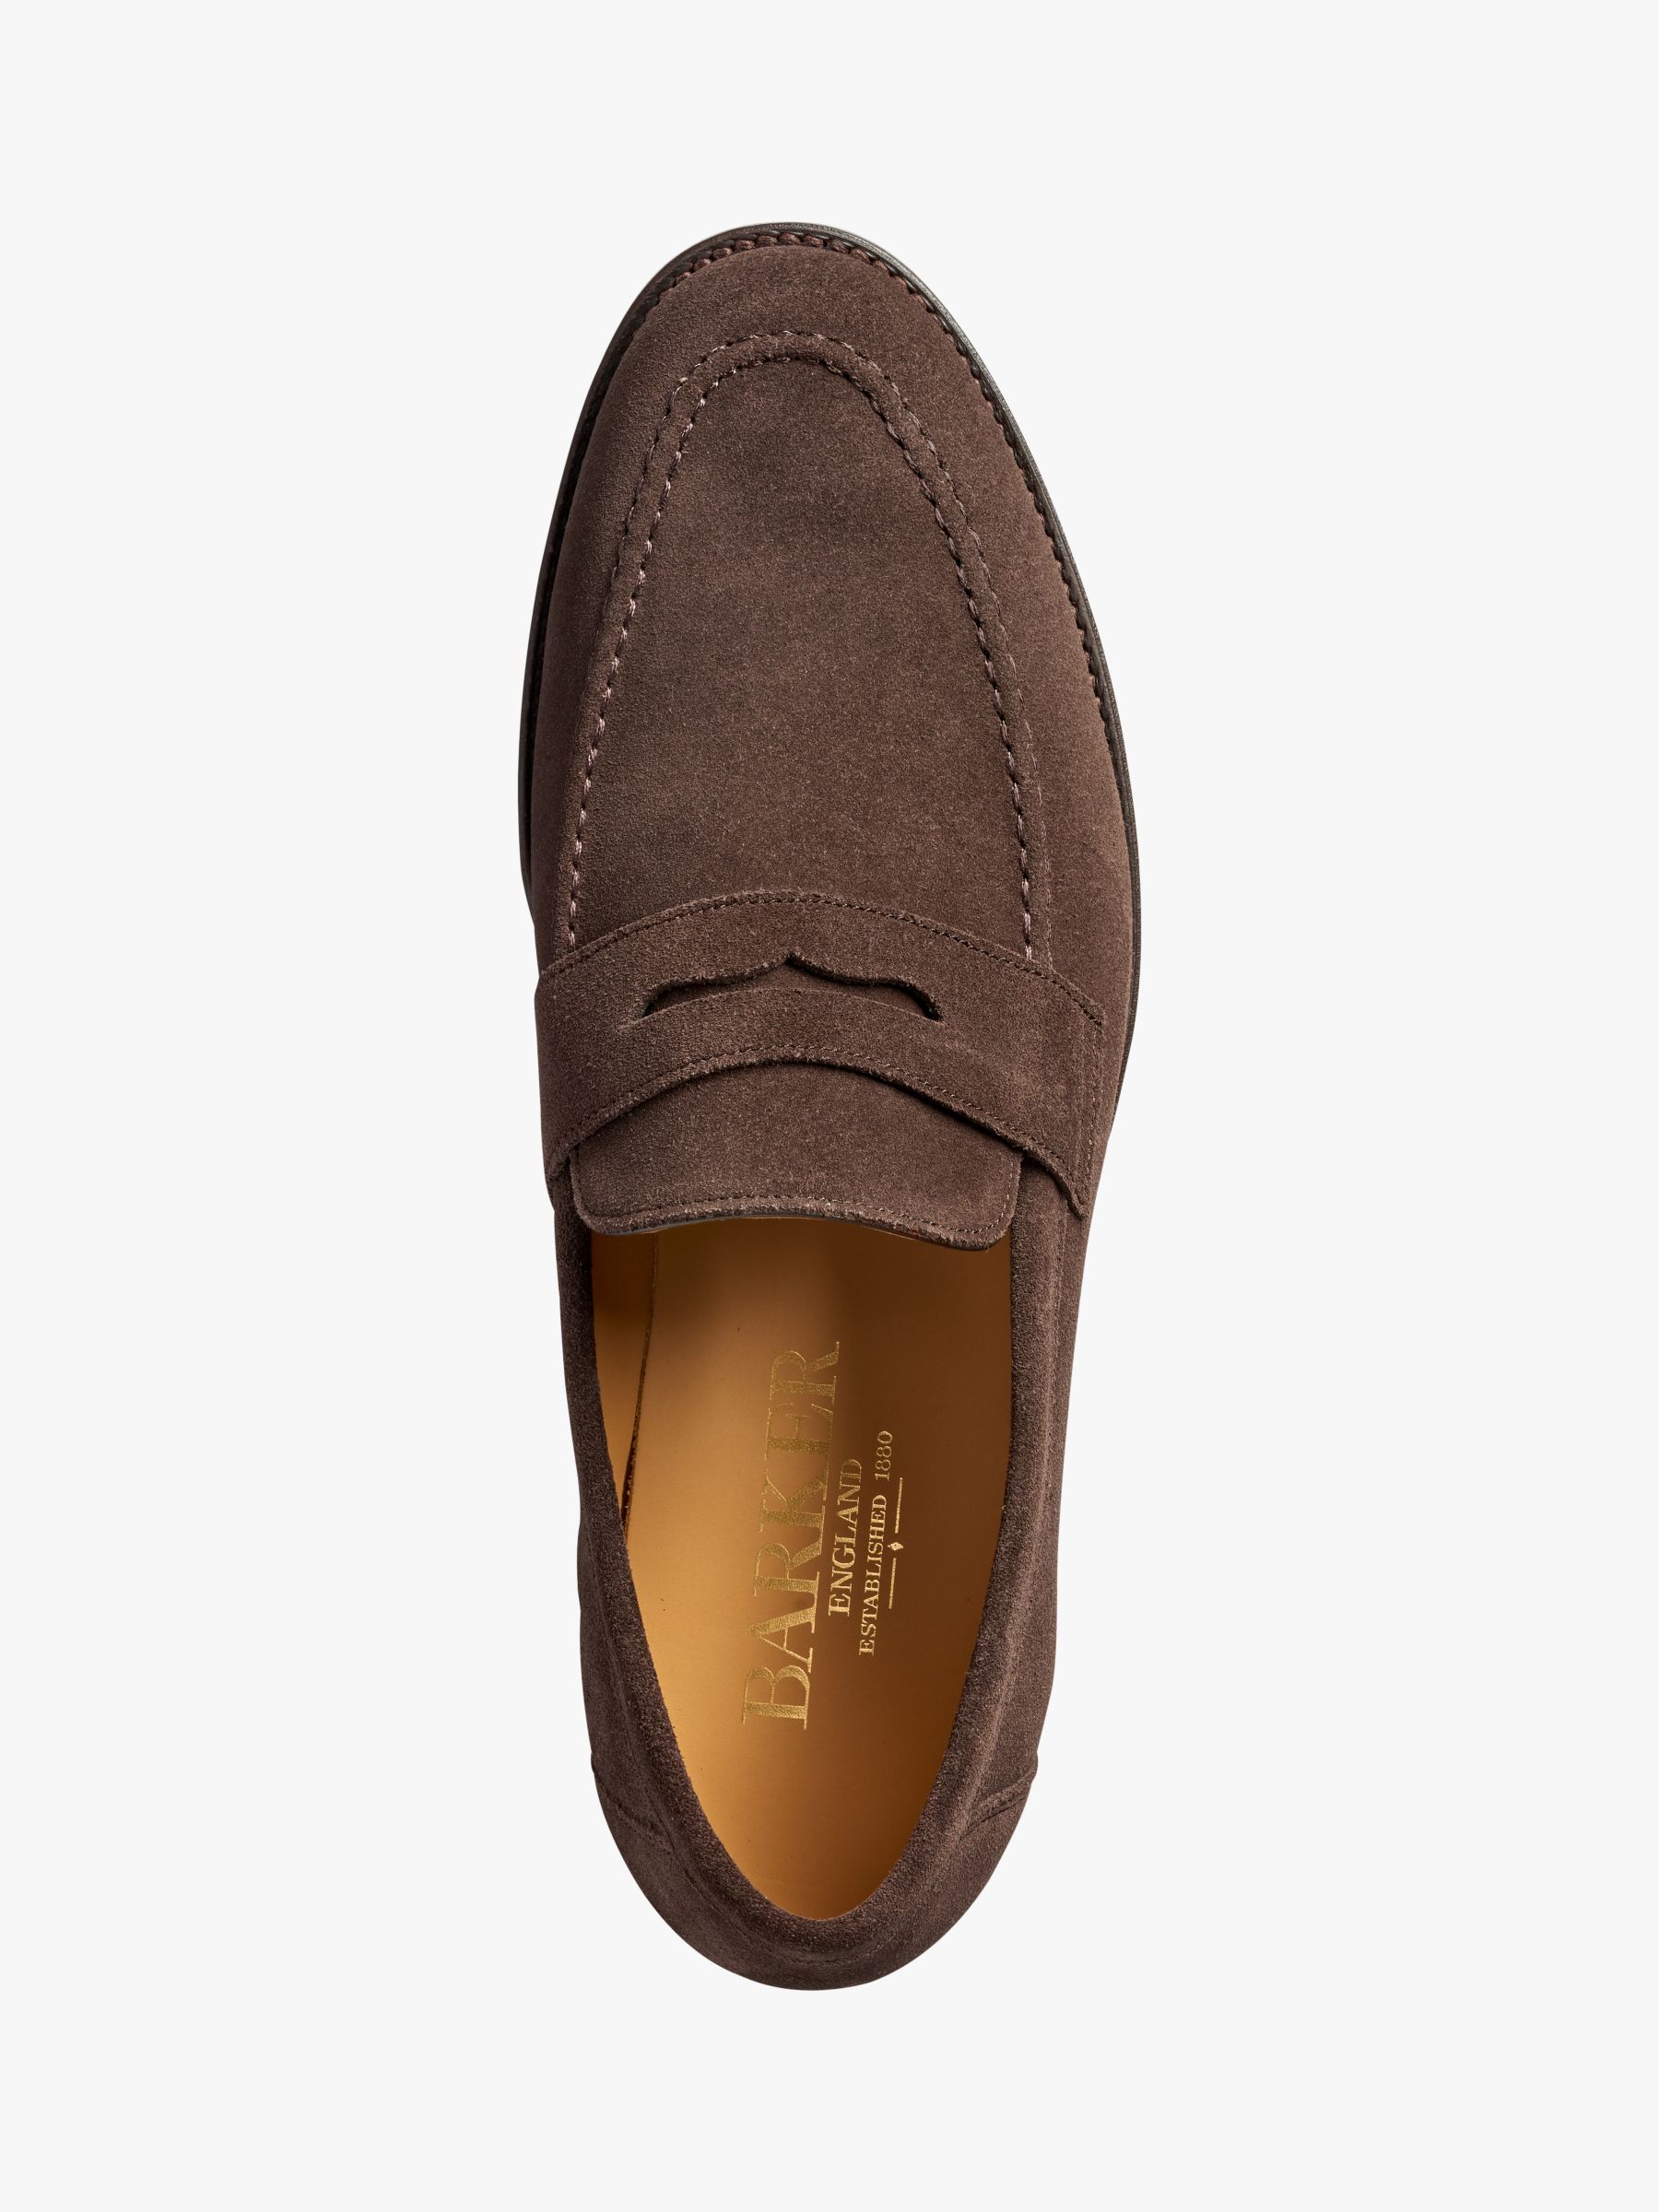 Barker Audley Suede Loafers | Chocolate 